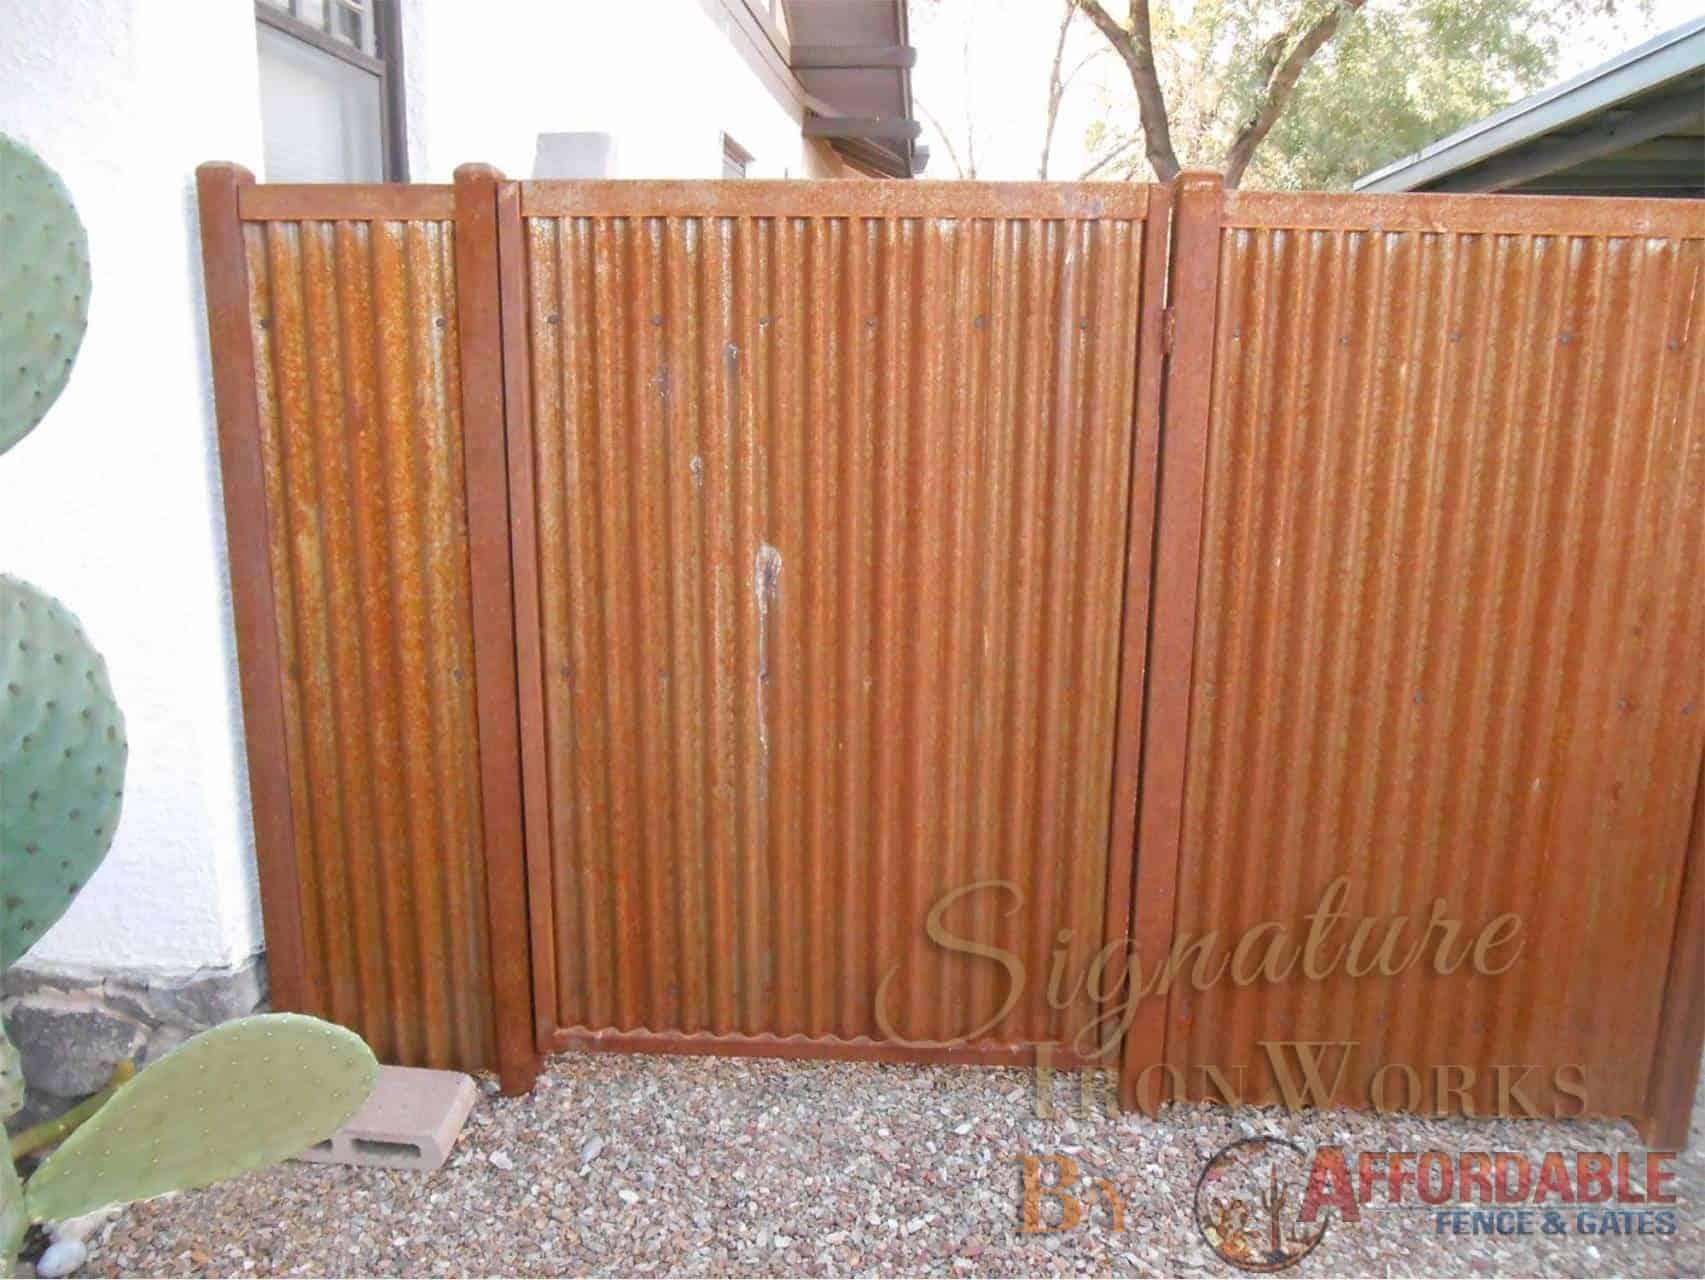 Corrugated Steel Gate | Signature Ironworks | Affordable Fence & Gates | Rusty | Natural Rust